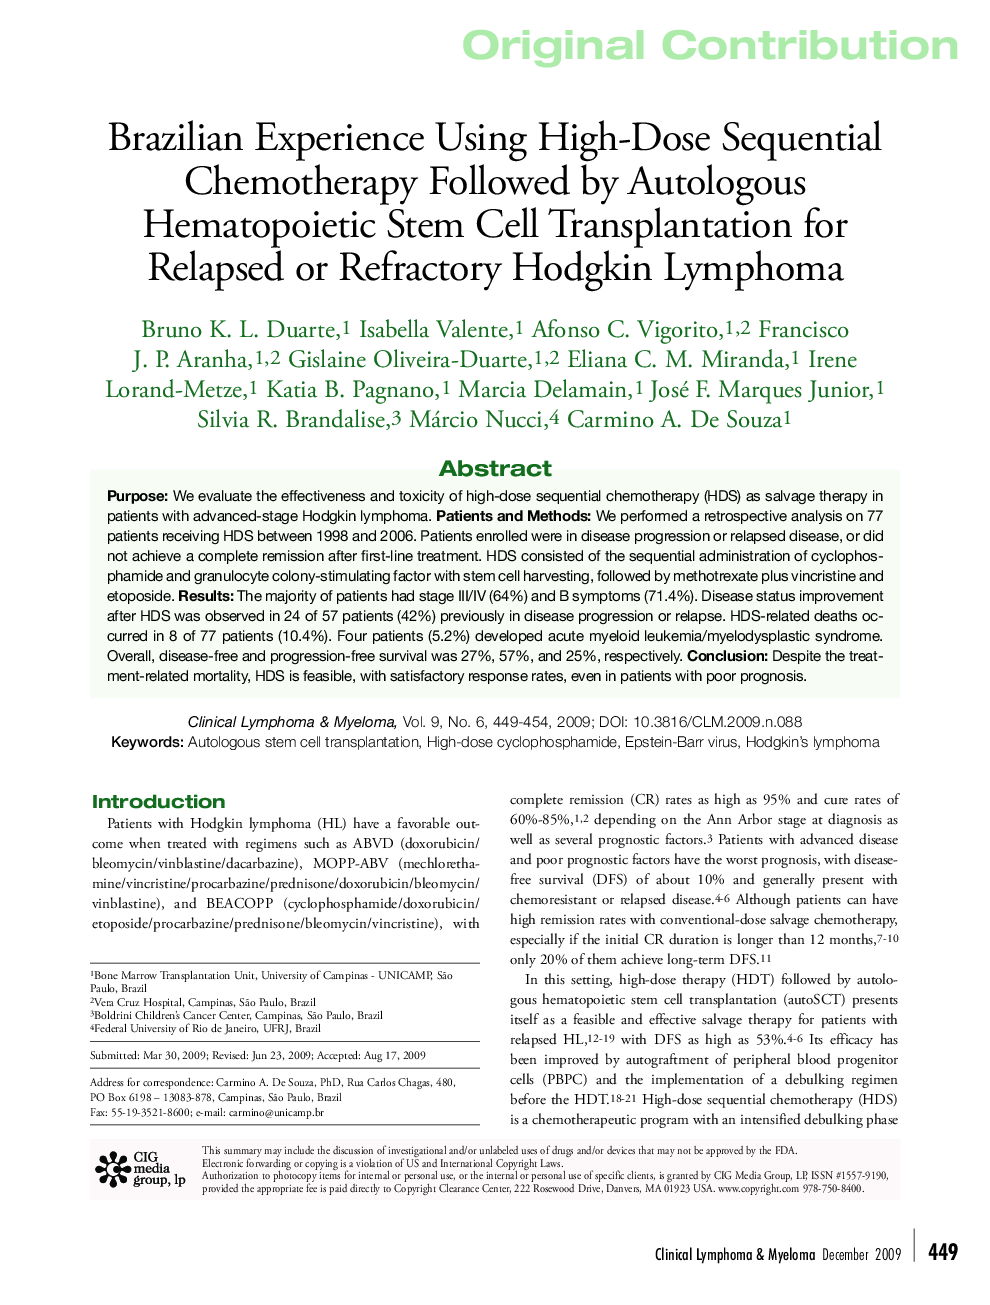 Brazilian Experience Using High-Dose Sequential Chemotherapy Followed by Autologous Hematopoietic Stem Cell Transplantation for Relapsed or Refractory Hodgkin Lymphoma 